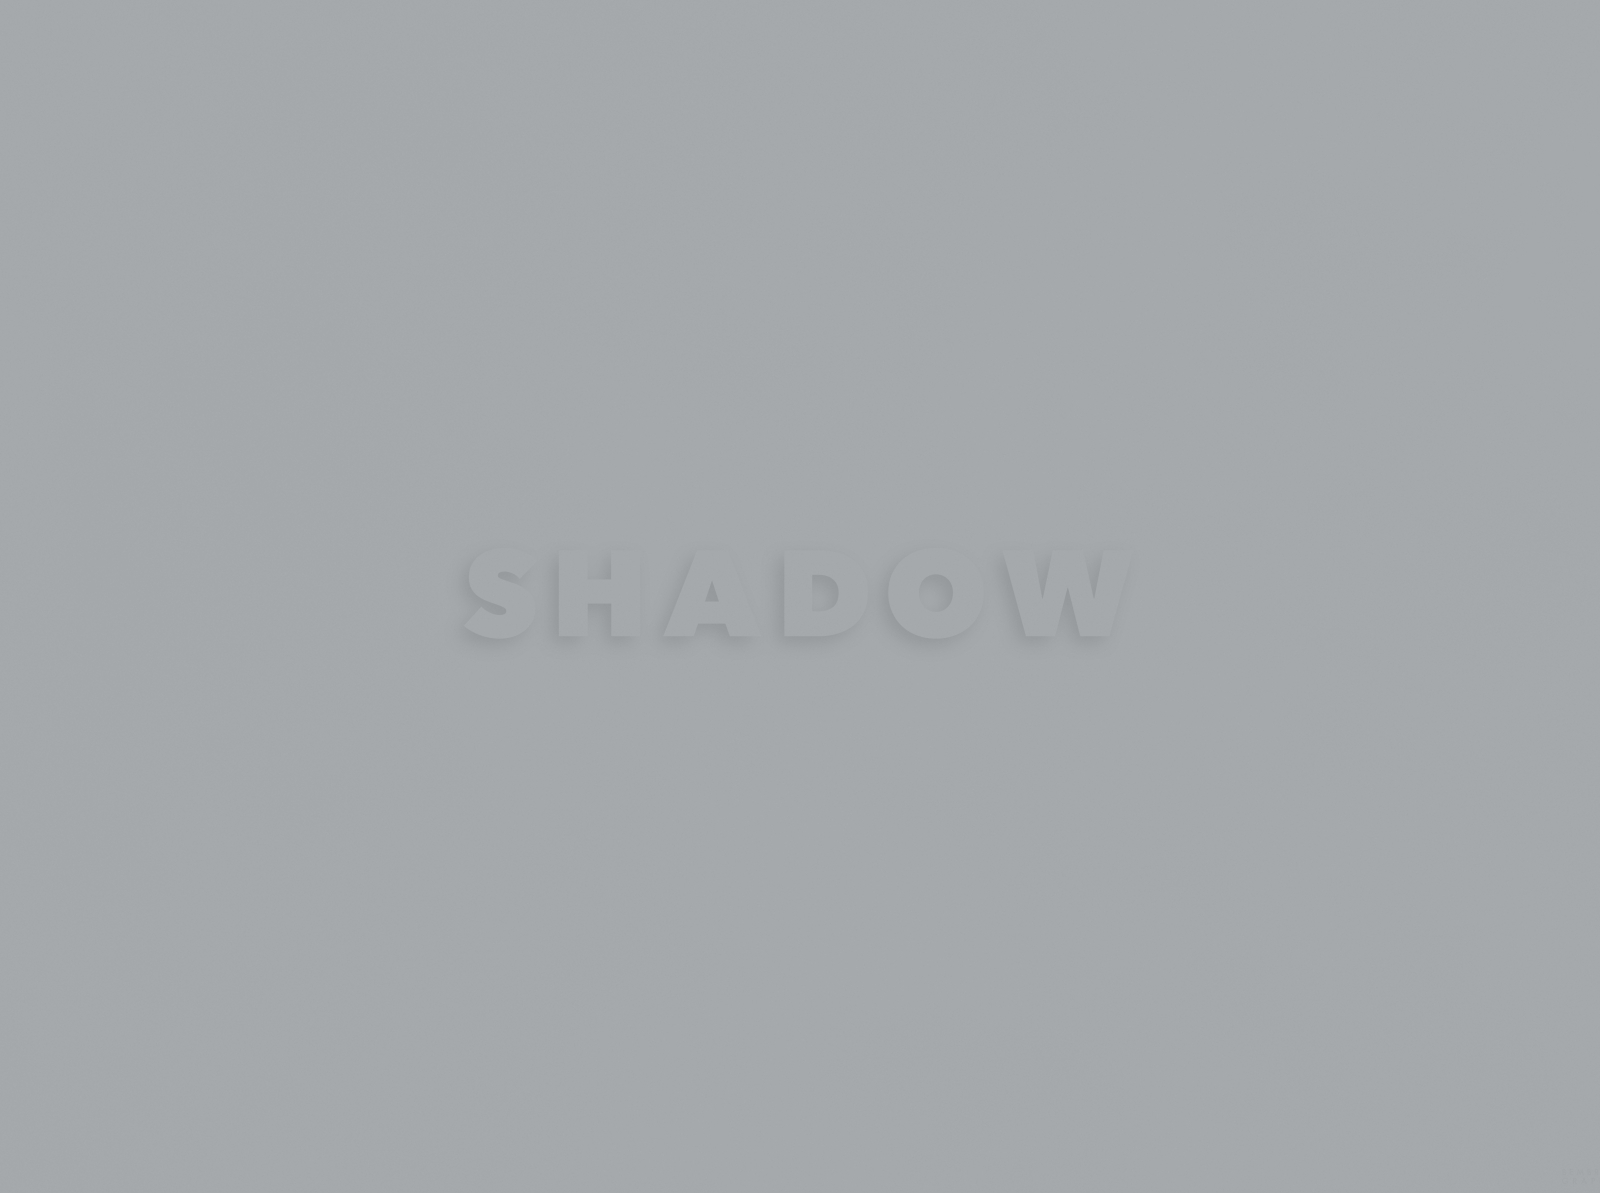 Shadow | Typographical Project by Karl Bembridge on Dribbble